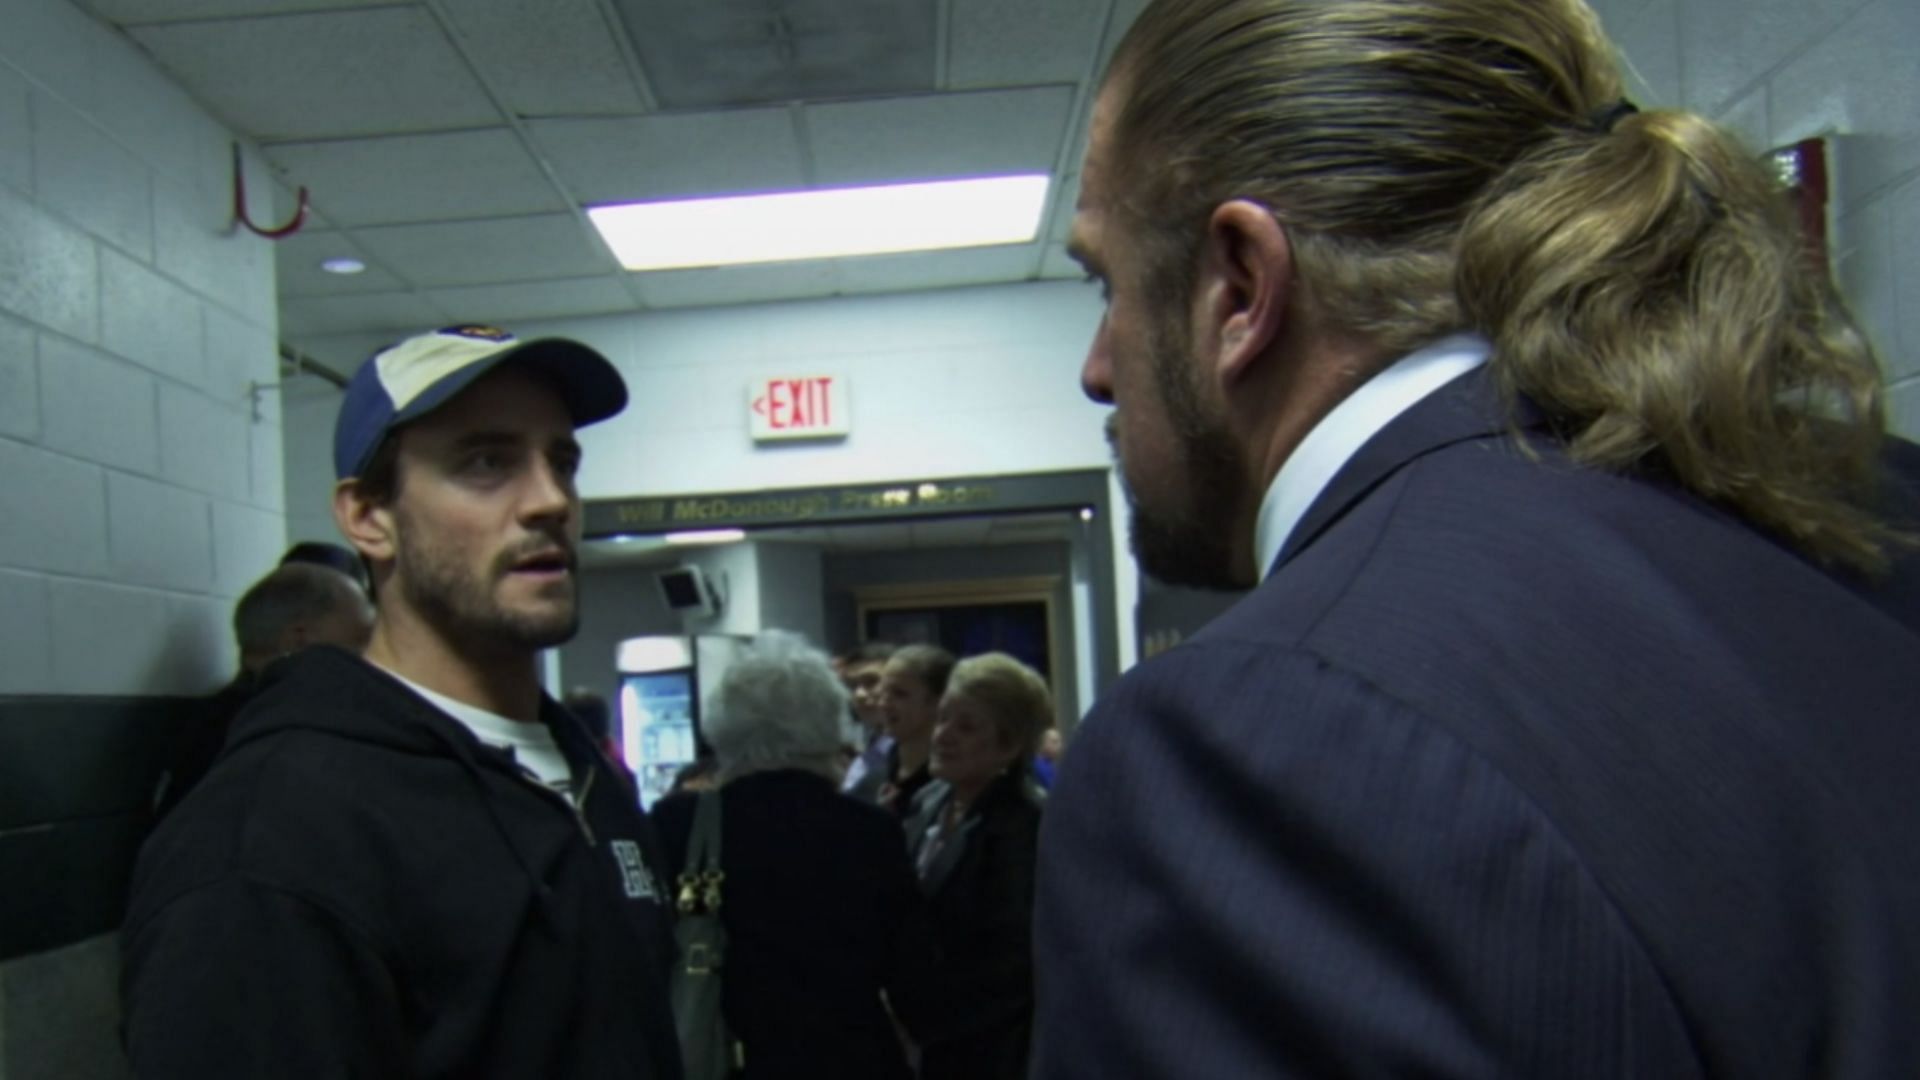 CM Punk (left) and Triple H (right)